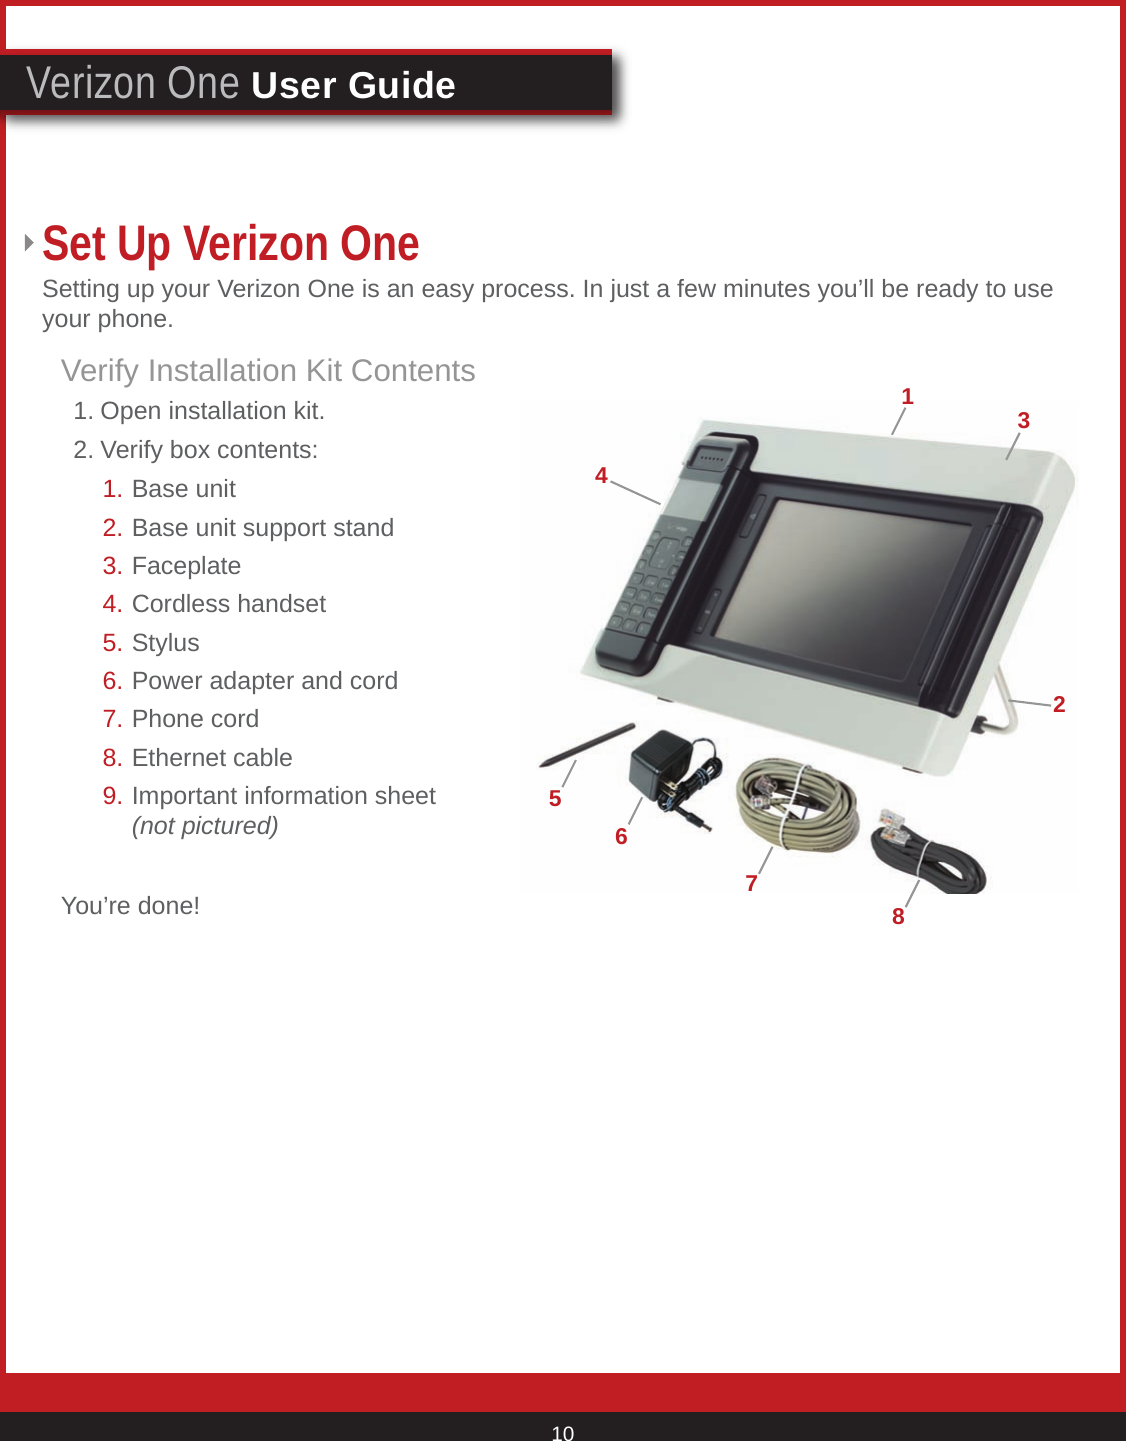 © 2007 Verizon. All Rights Reserved. 10Verizon One User GuideVerify Installation Kit Contents  1. Open installation kit.  2. Verify box contents:You’re done!Set Up Verizon One Setting up your Verizon One is an easy process. In just a few minutes you’ll be ready to use your phone.72416358Base unit Base unit support stand Faceplate Cordless handset Stylus Power adapter and cord Phone cord Ethernet cableImportant information sheet (not pictured)1.2. 3. 4. 5.   6. 7.8.9.